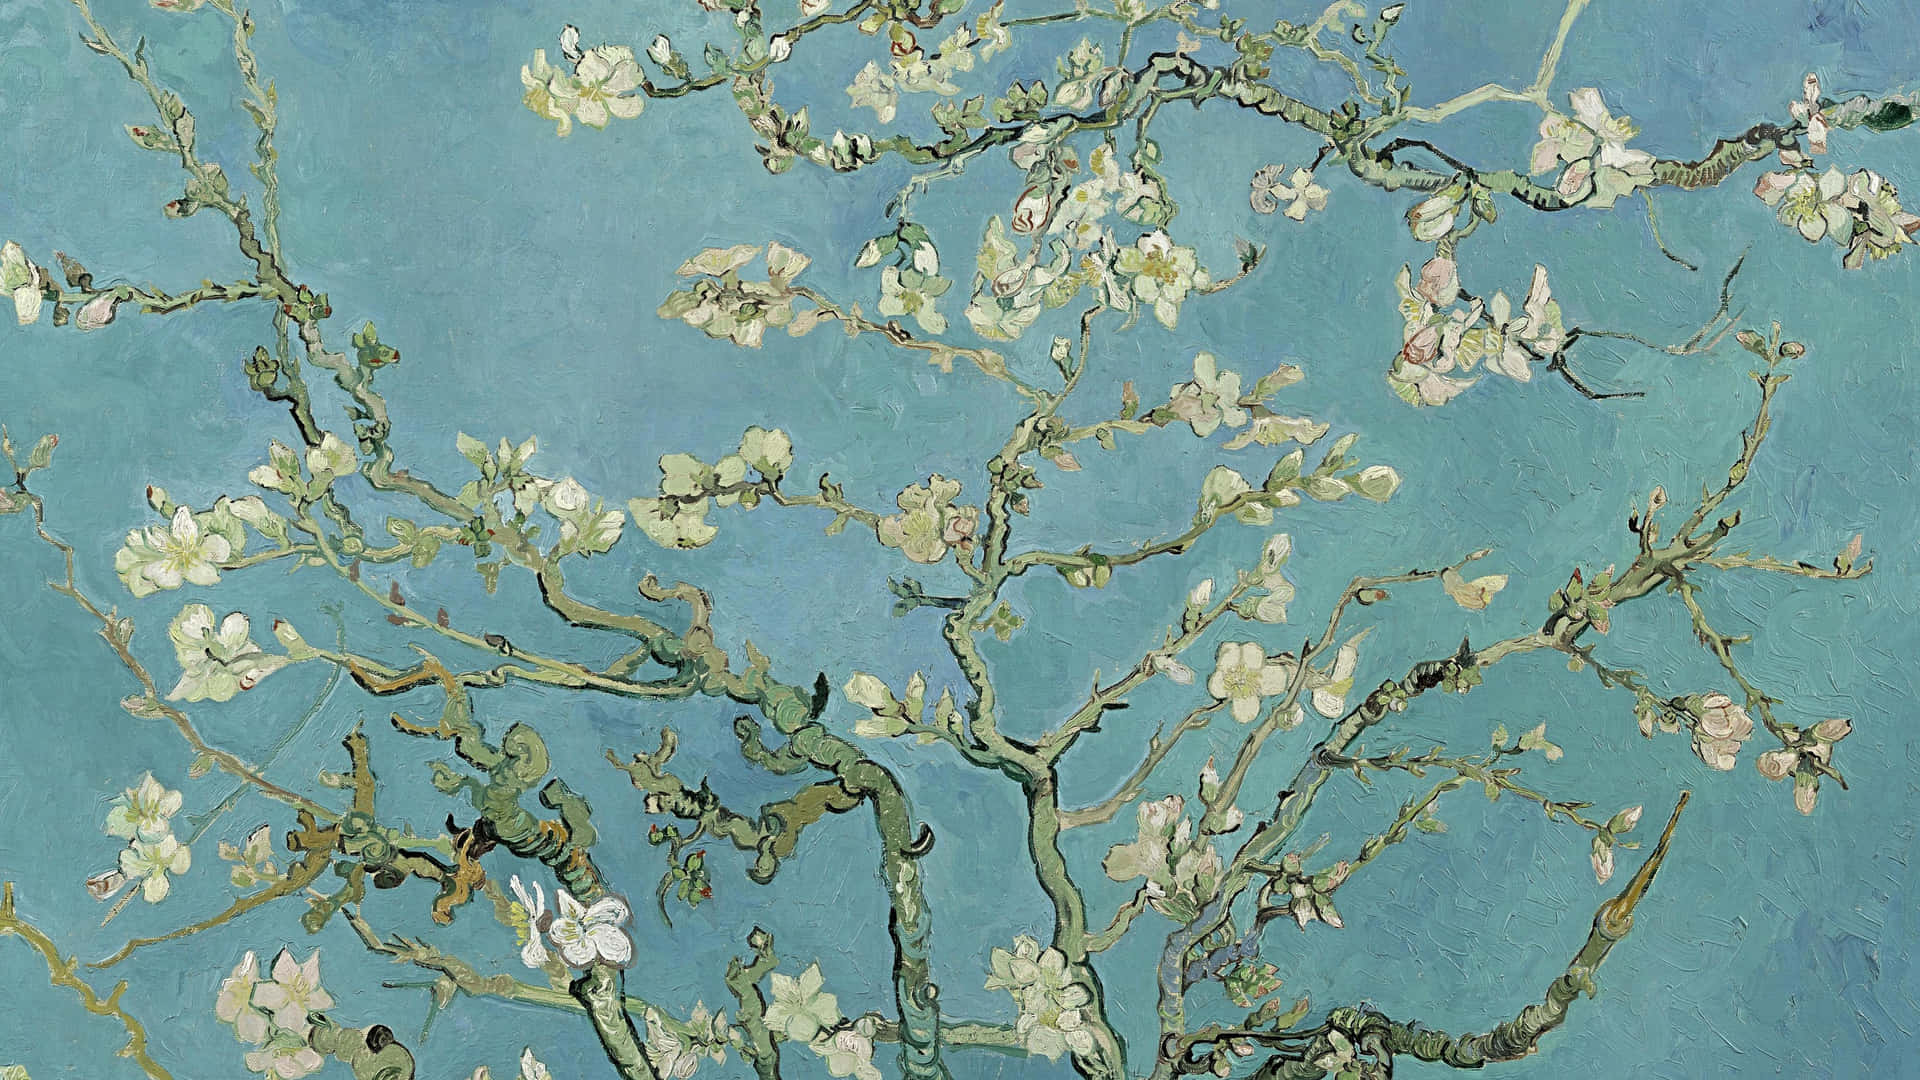 Almond Blossoms - A classic painting by Vincent van Gogh Wallpaper